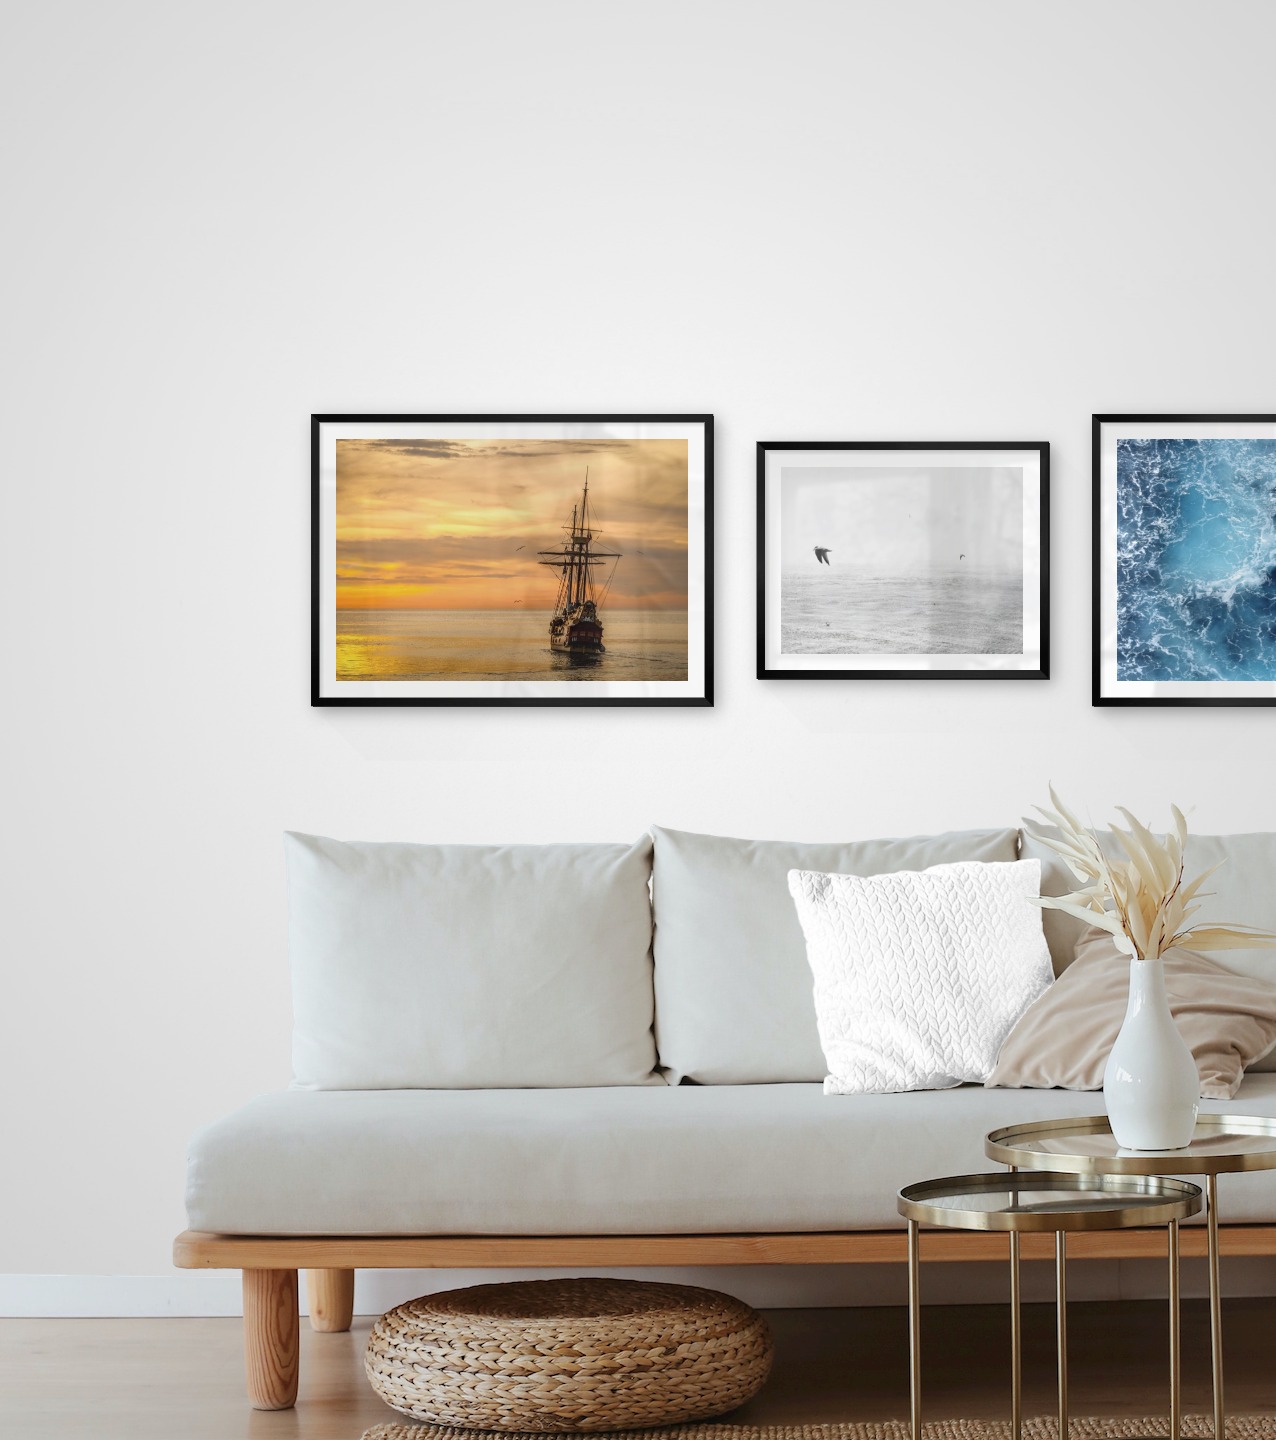 Gallery wall with picture frames in black in sizes 50x70 and 40x50 with prints "Ships at sea", "Birds over the sea" and "Sea from above"